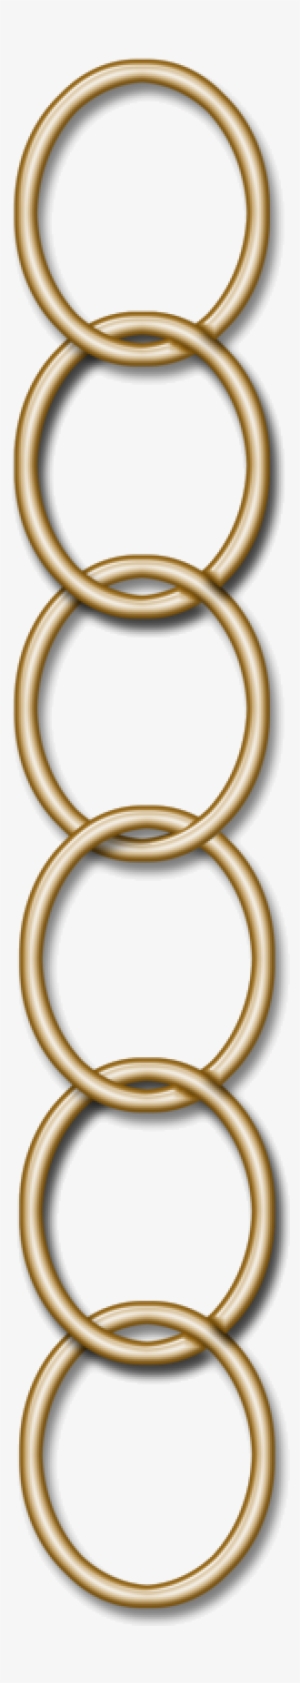 chain png image - chain